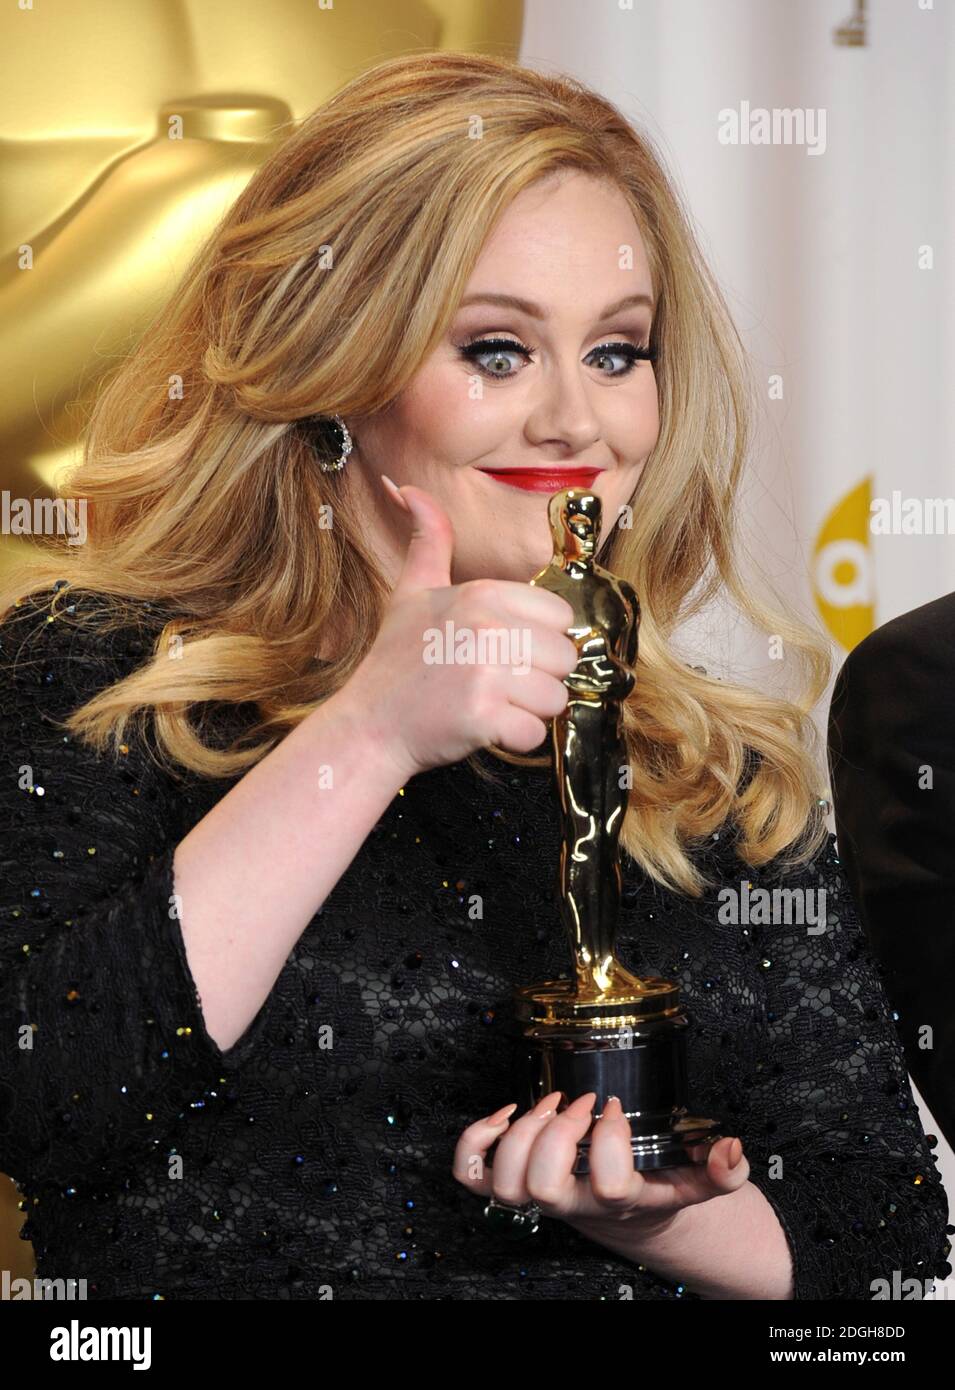 Adele at the 85th Academy Awards at the Dolby Theatre, Los Angeles.  Stock Photo